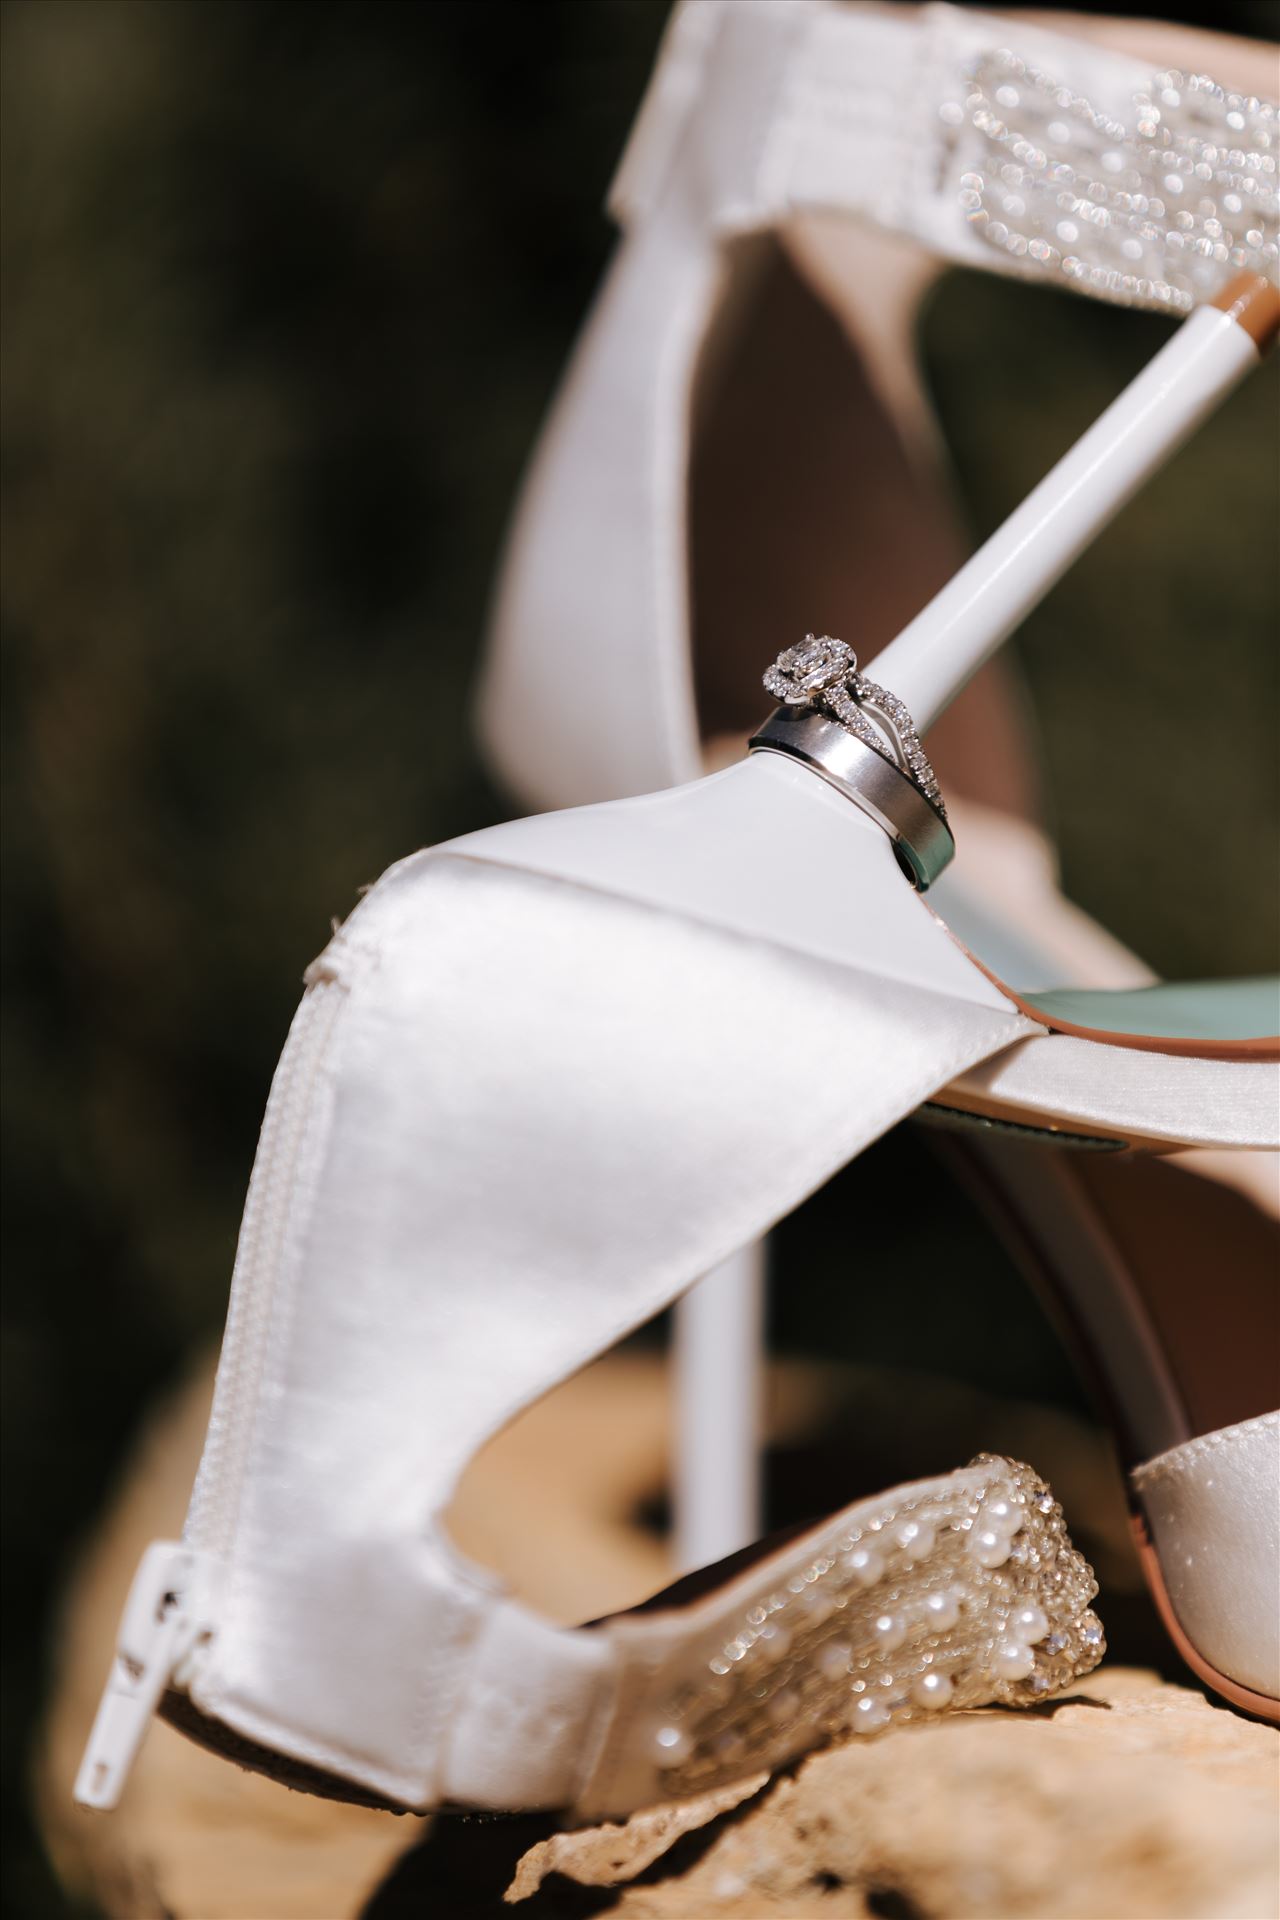 _Y9A6433.JPG - Tooth and Nail Winery elegant and formal wedding in Paso Robles California wine country by Mirror's Edge Photography, San Luis Obispo County Wedding Photographer. Bridal shoes and wedding rings by Sarah Williams